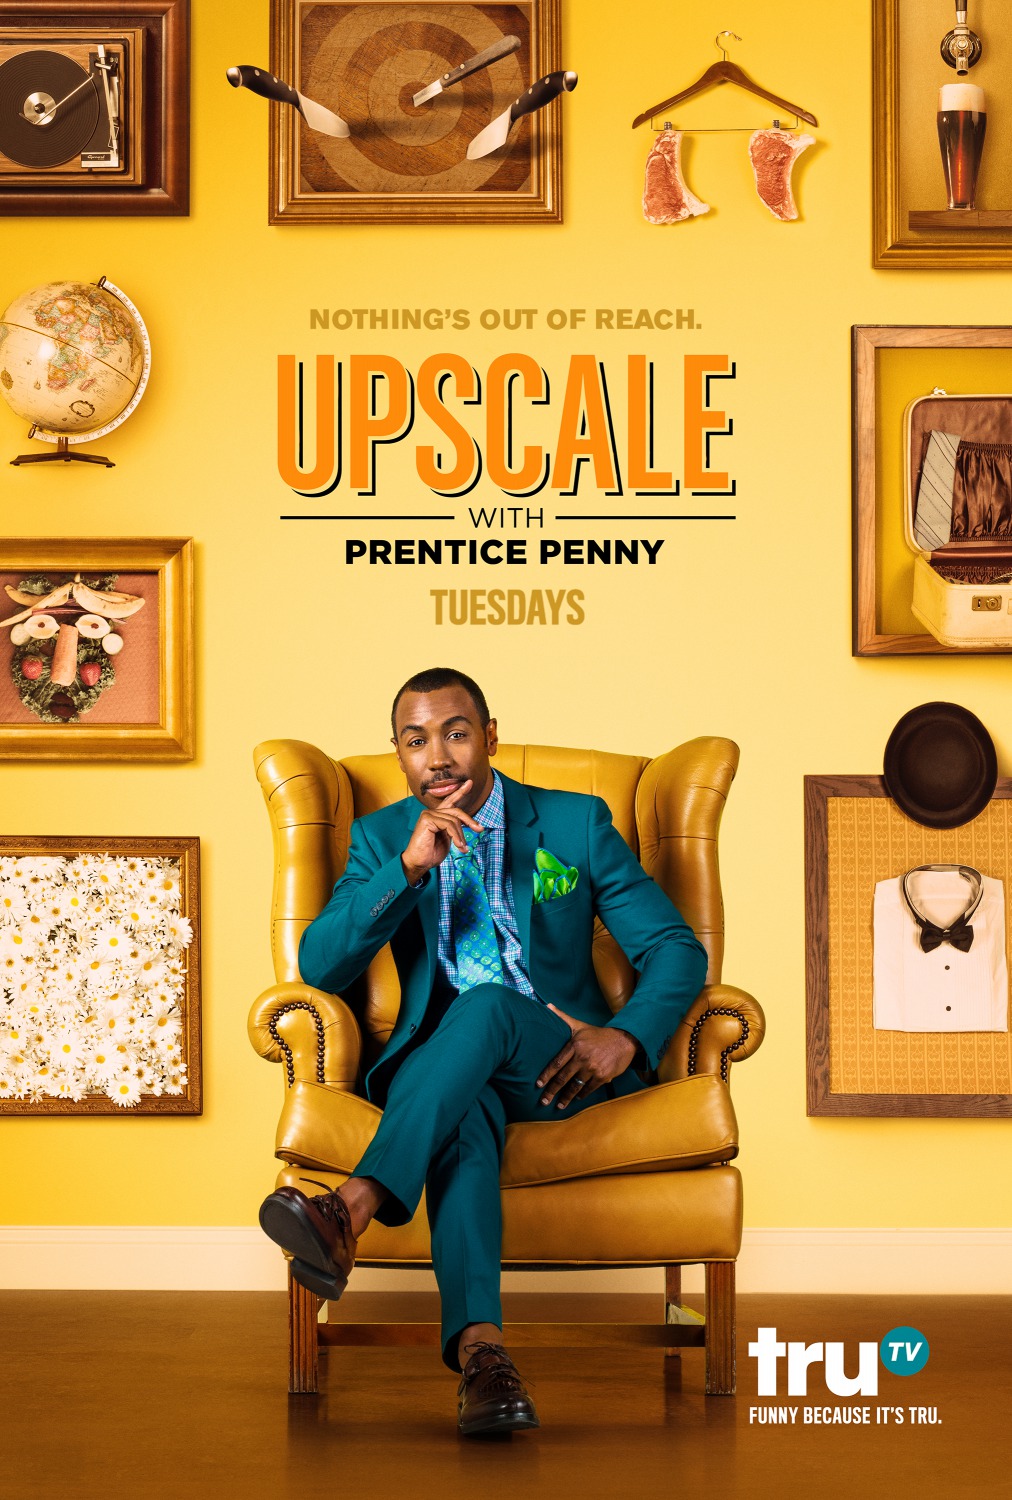 Extra Large TV Poster Image for Upscale with Prentice Penny 